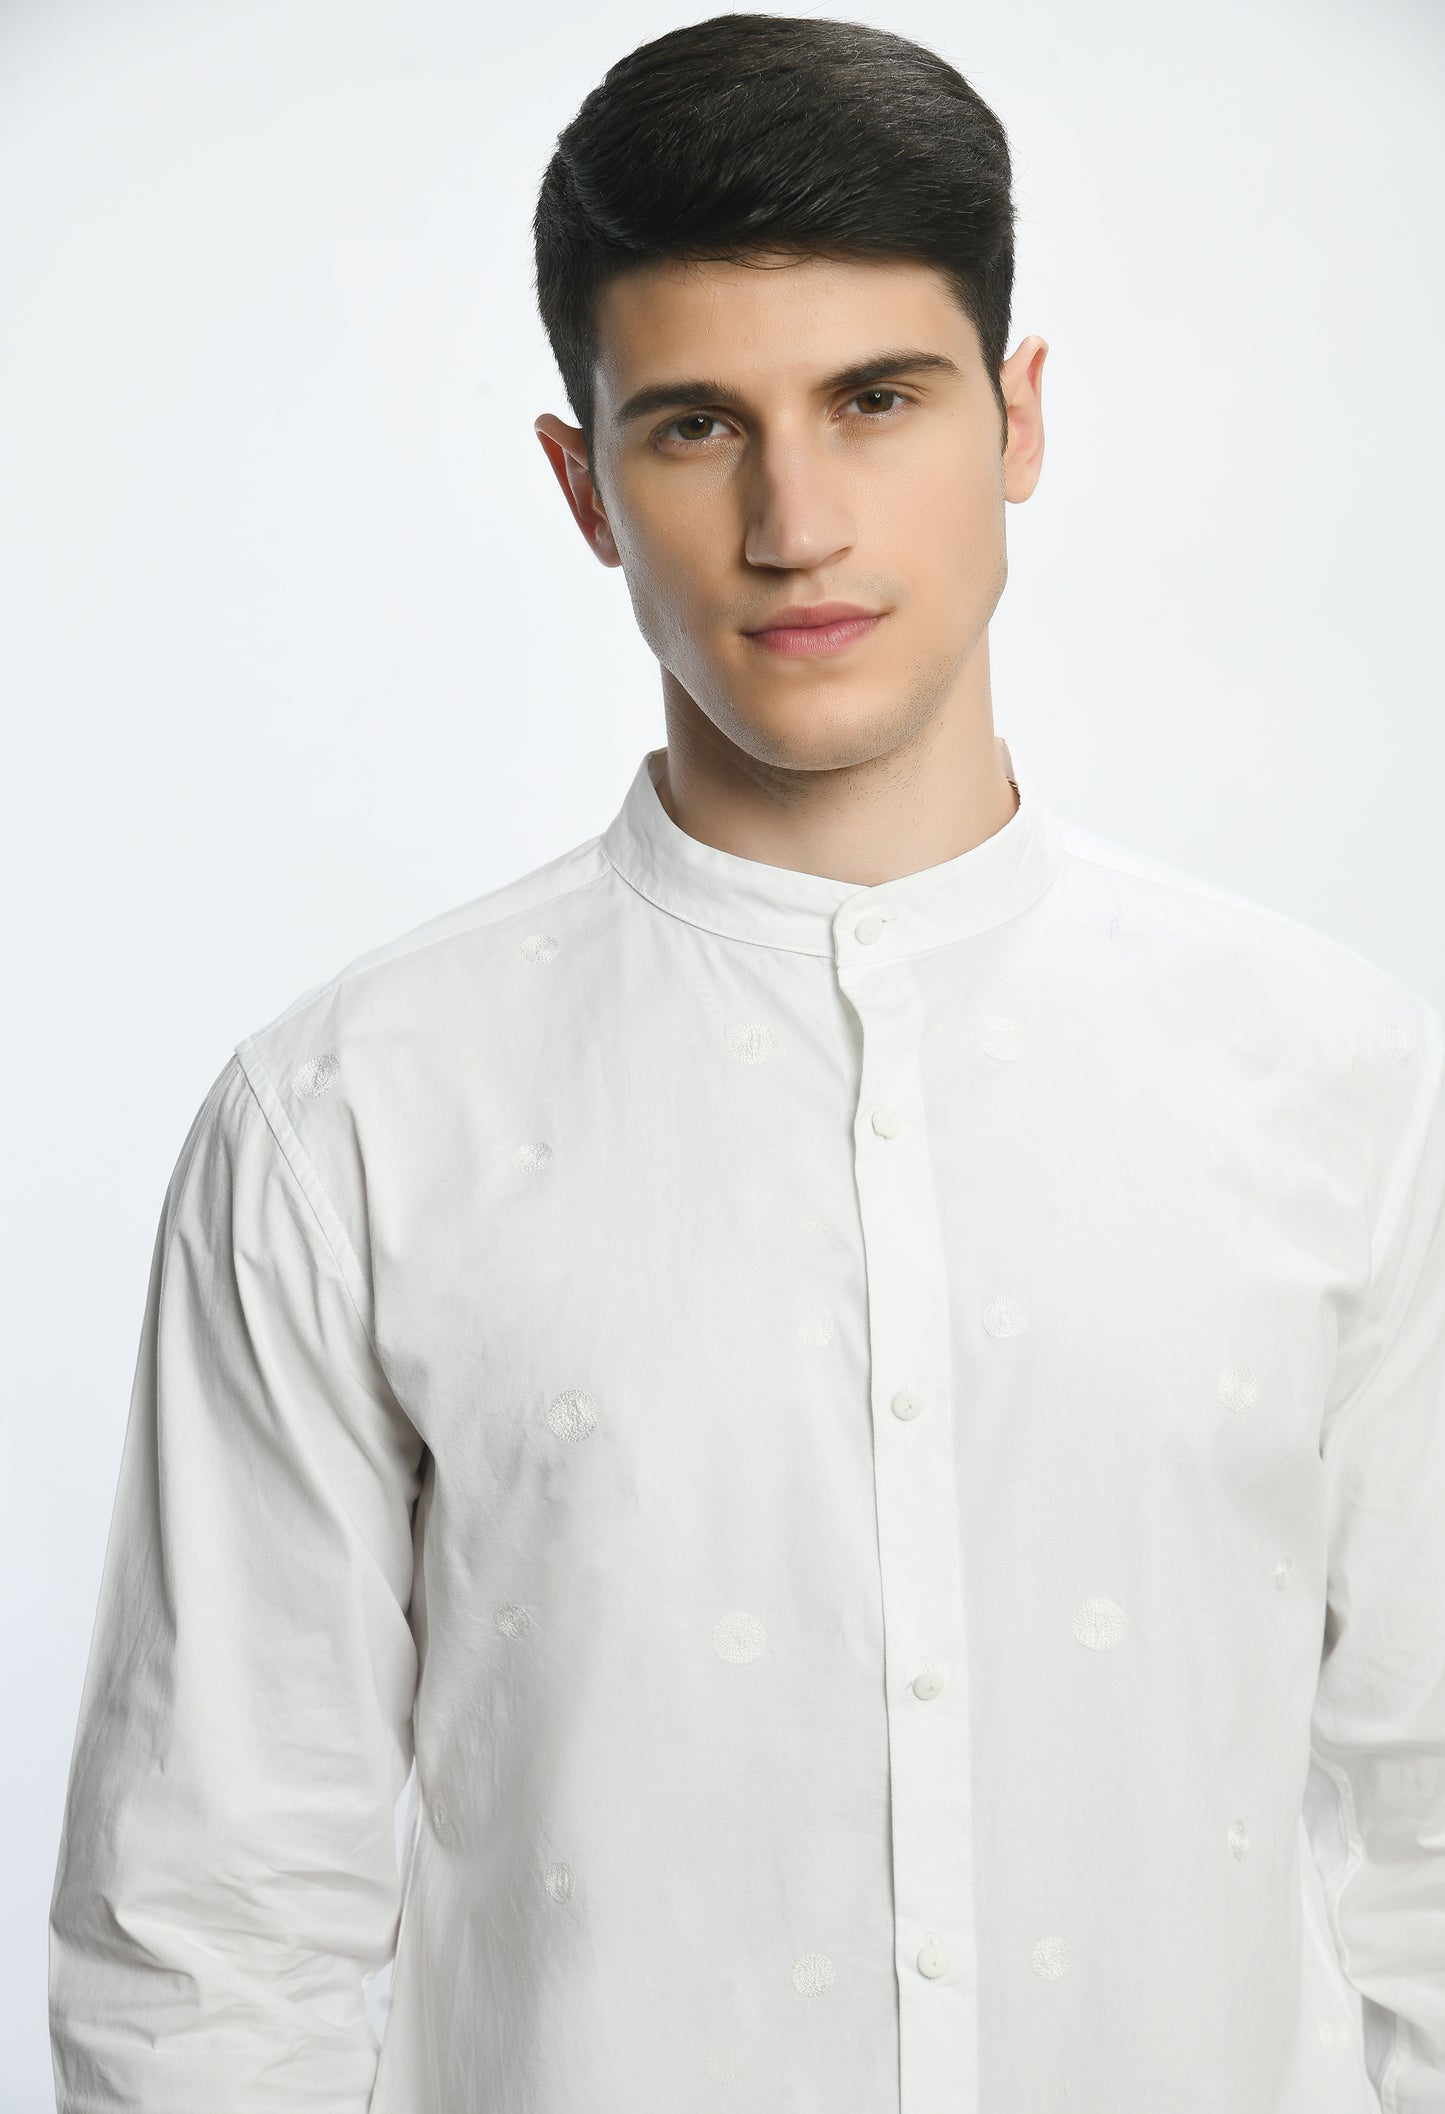 A white cotton shirt with band neckline, showcasing tone on tone thread embroidery